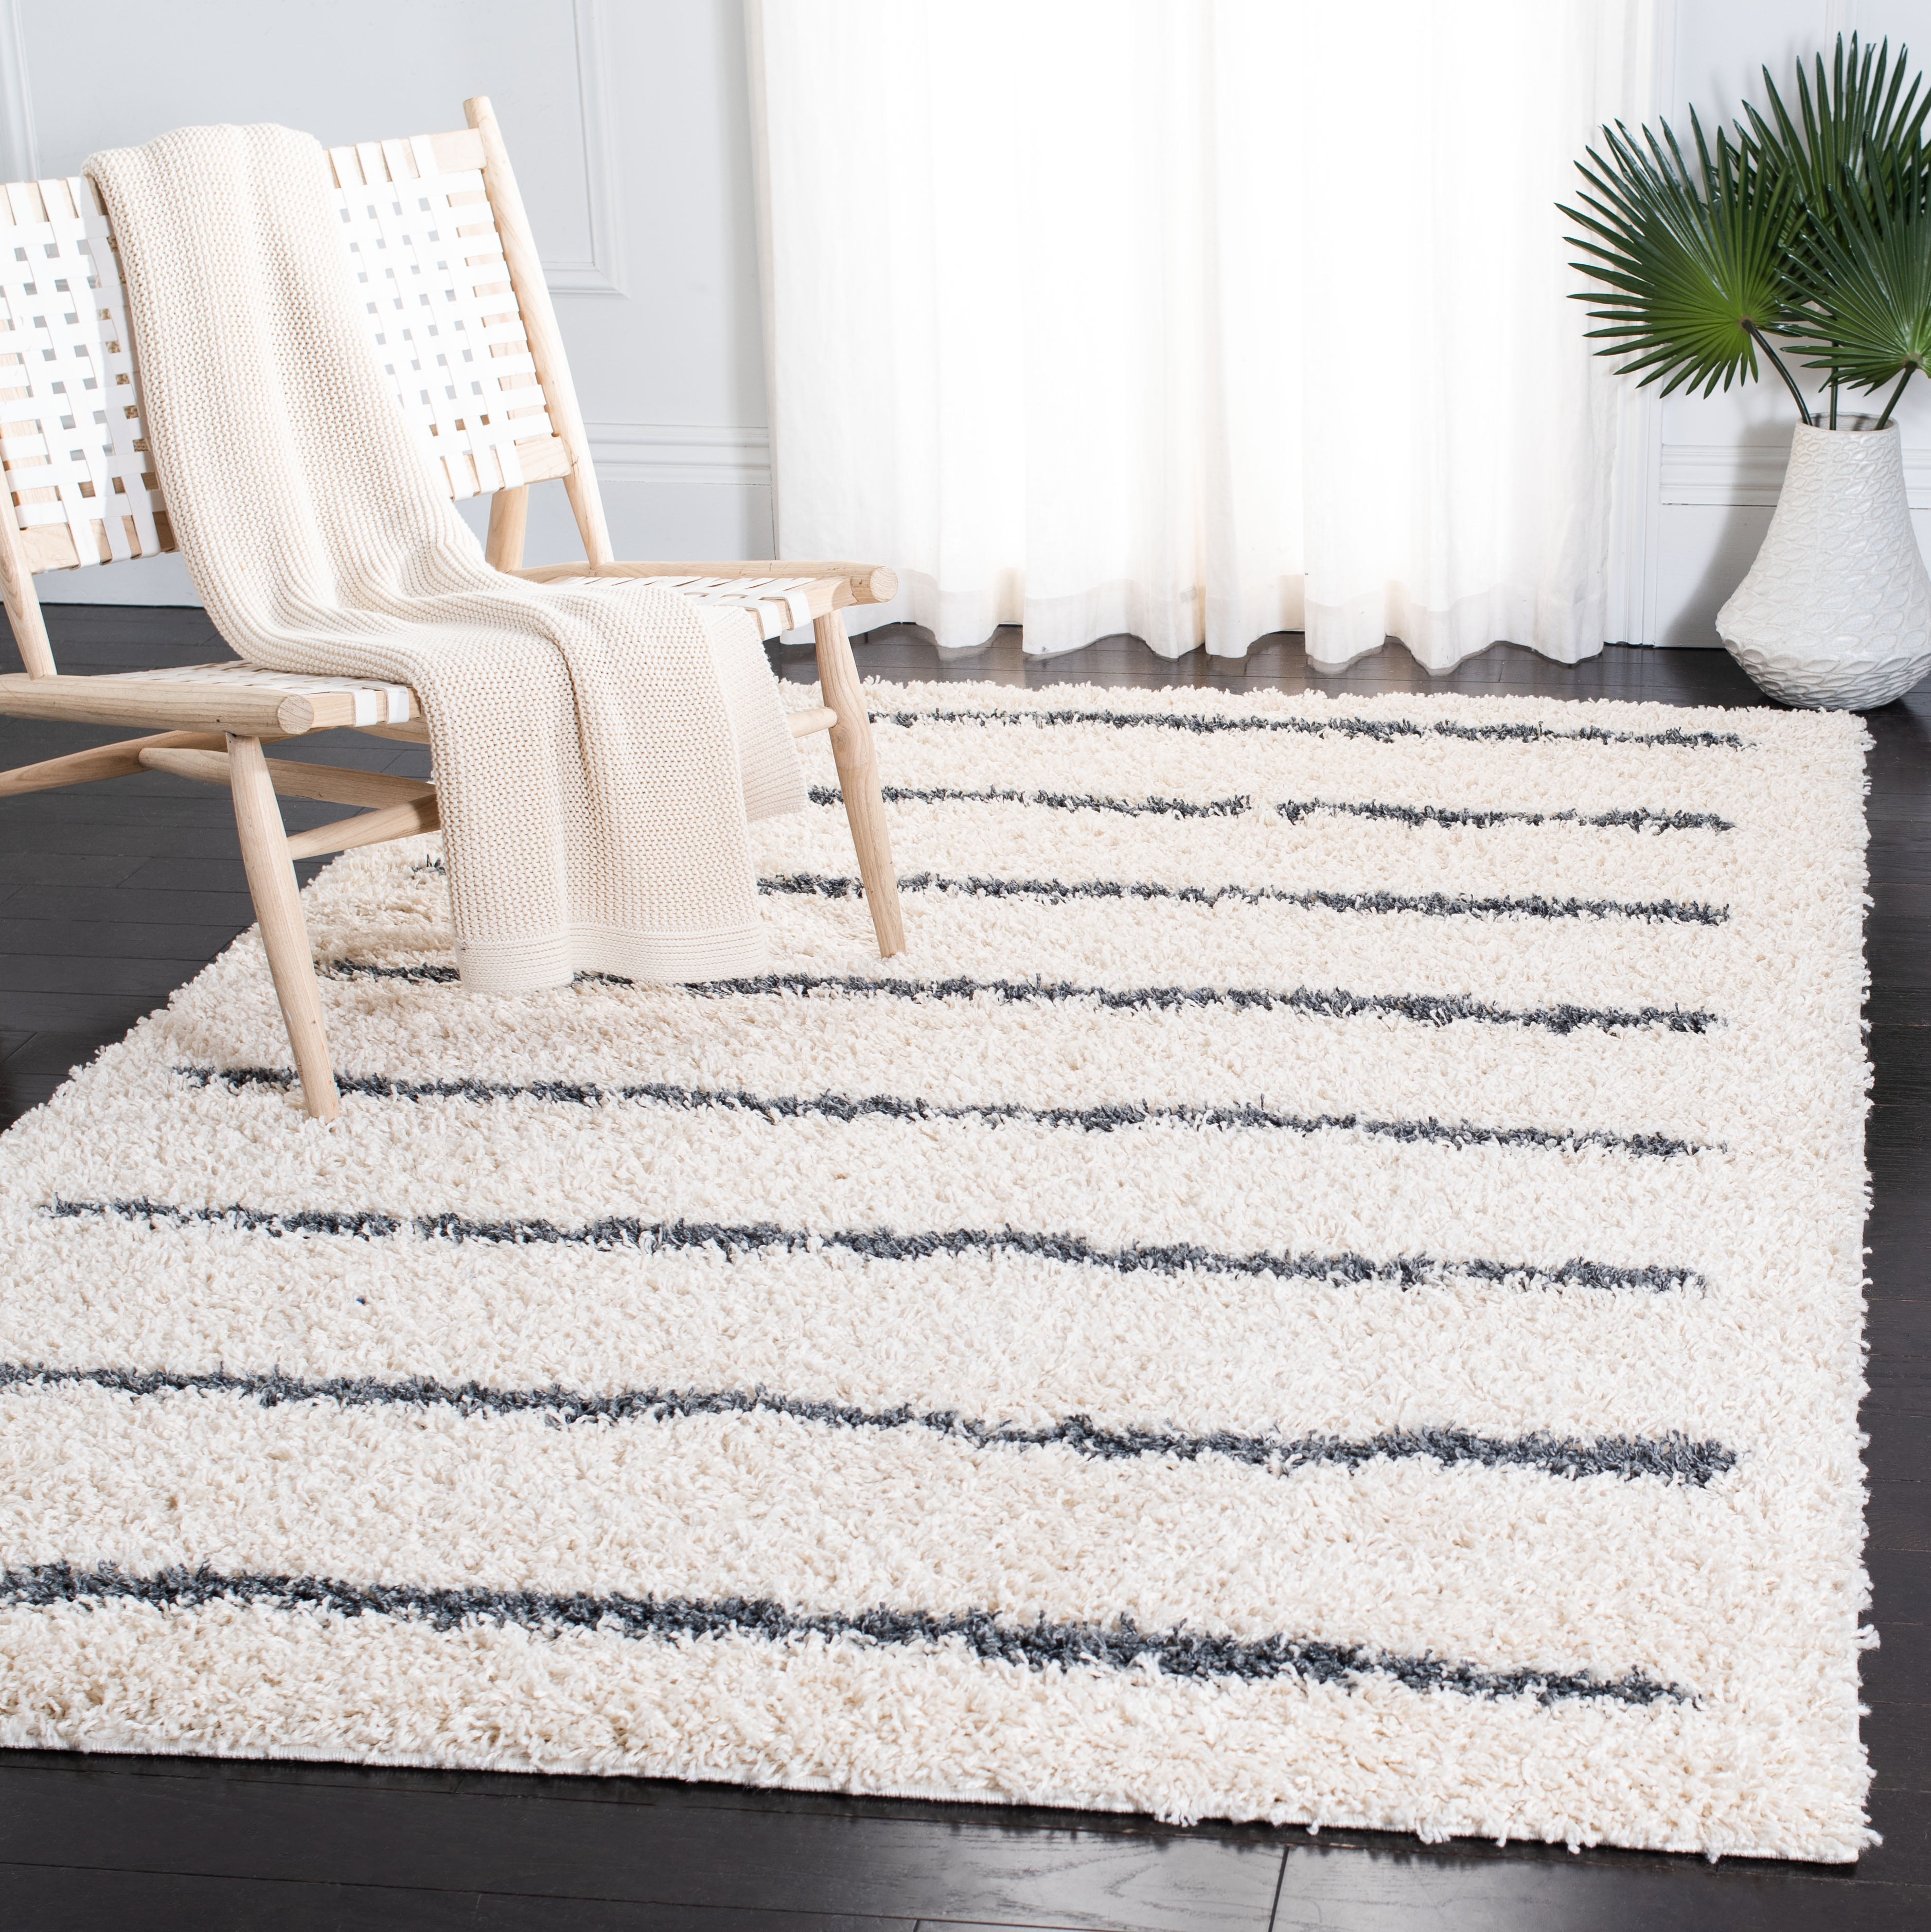 Ivory SAFAVIEH Venus Shag Collection VNS603B Stripe Non-Shedding Living Room Bedroom Dining Room Entryway Plush 1.8-inch Thick Area Rug Dark Grey 6'7 x 6'7 Round 